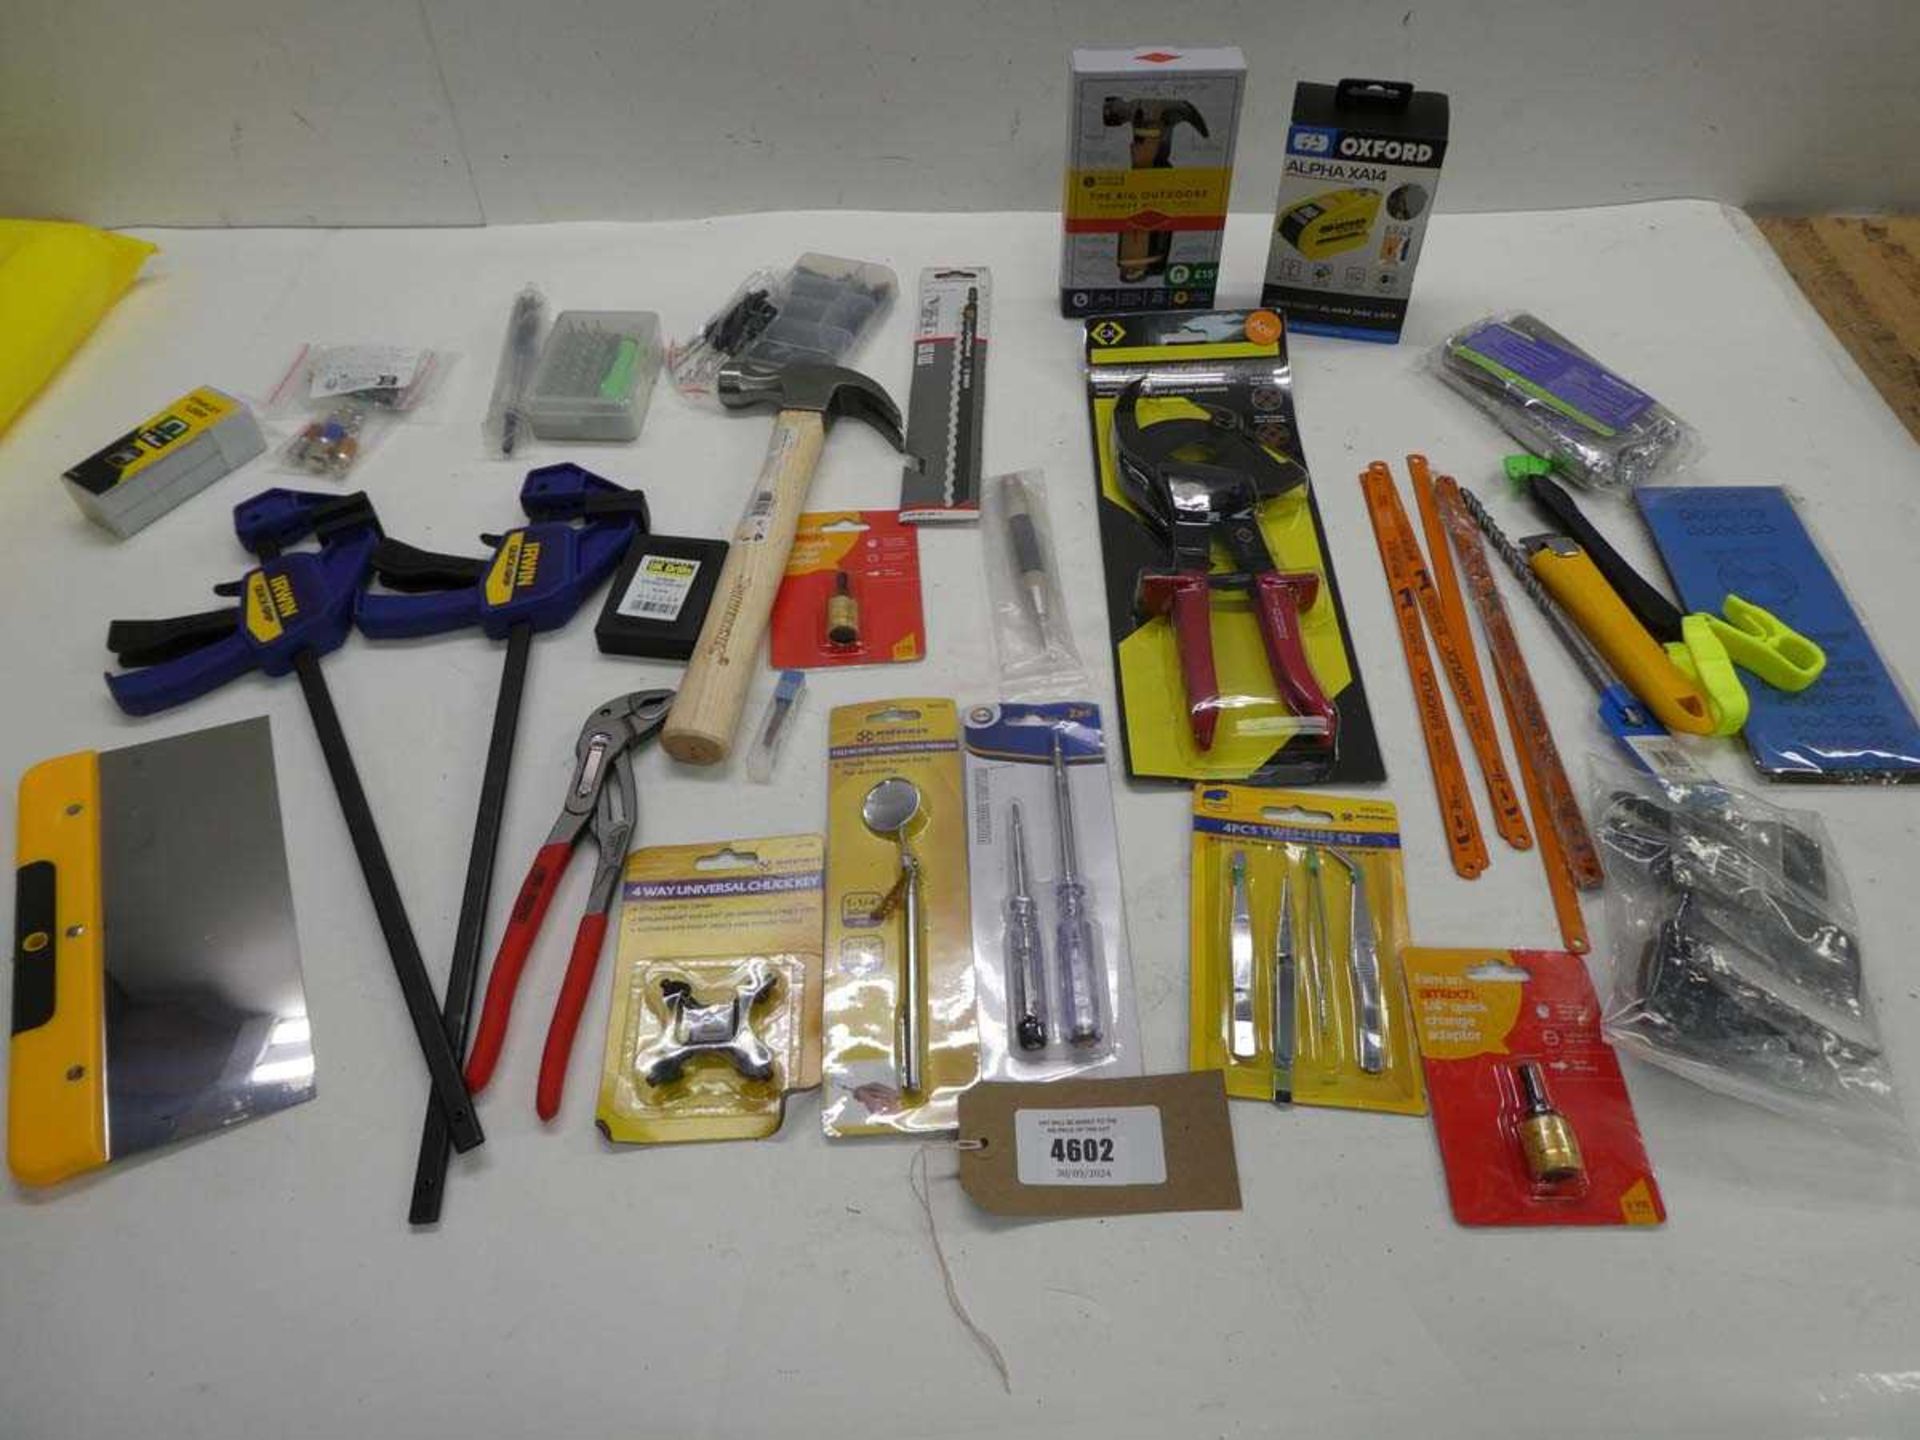 +VAT Hammer, Ratchet cable cutter, F clamps, Oxfor disc lock, drill bits, saws blades, chuck key,